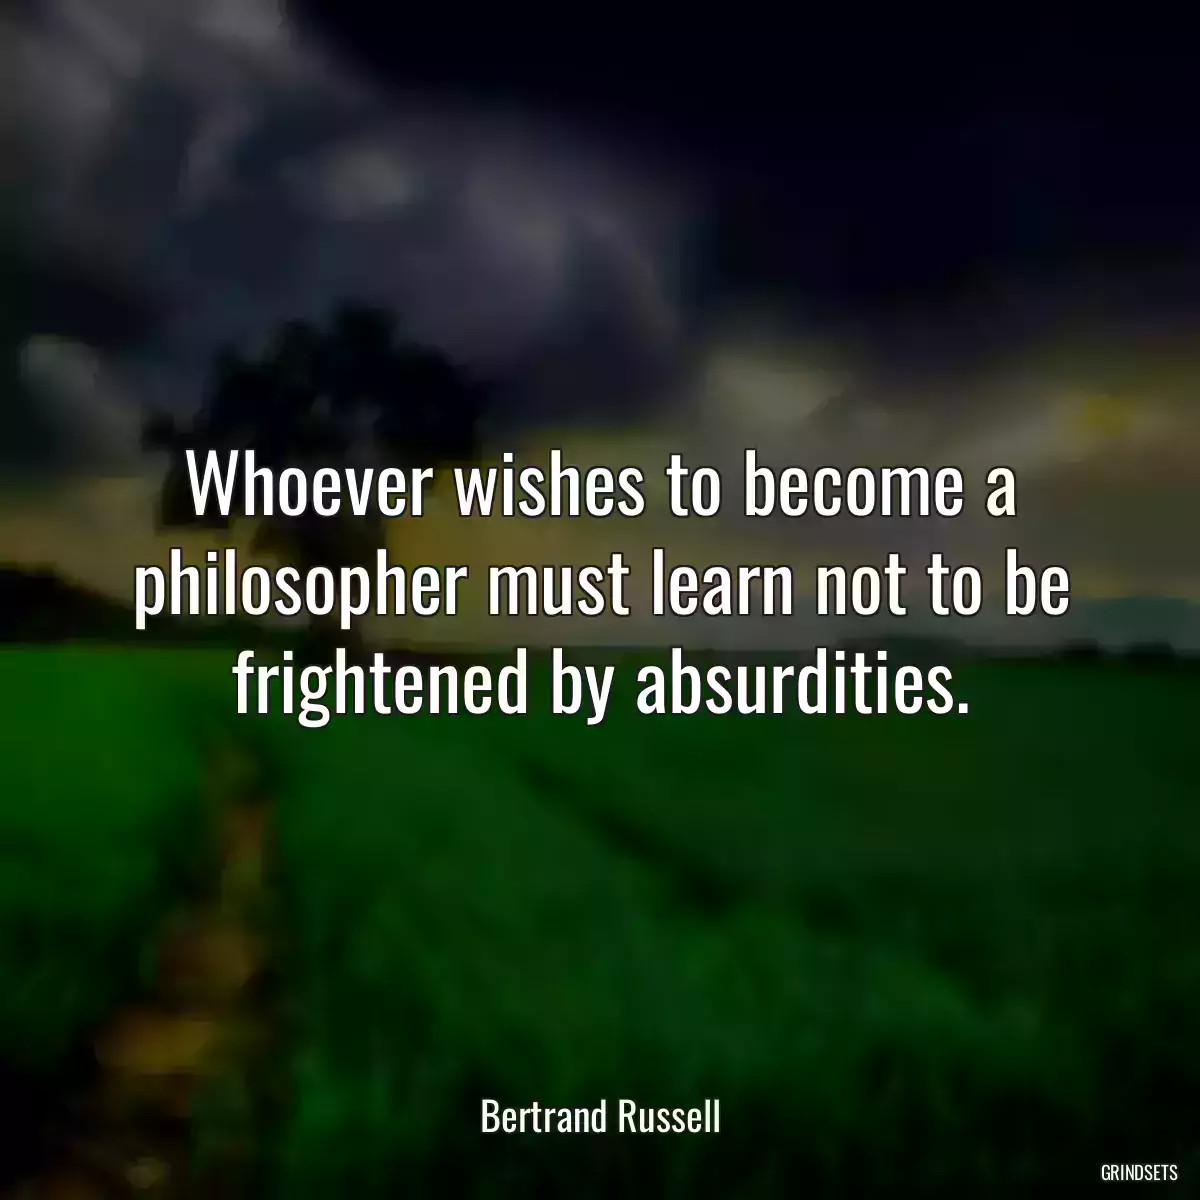 Whoever wishes to become a philosopher must learn not to be frightened by absurdities.